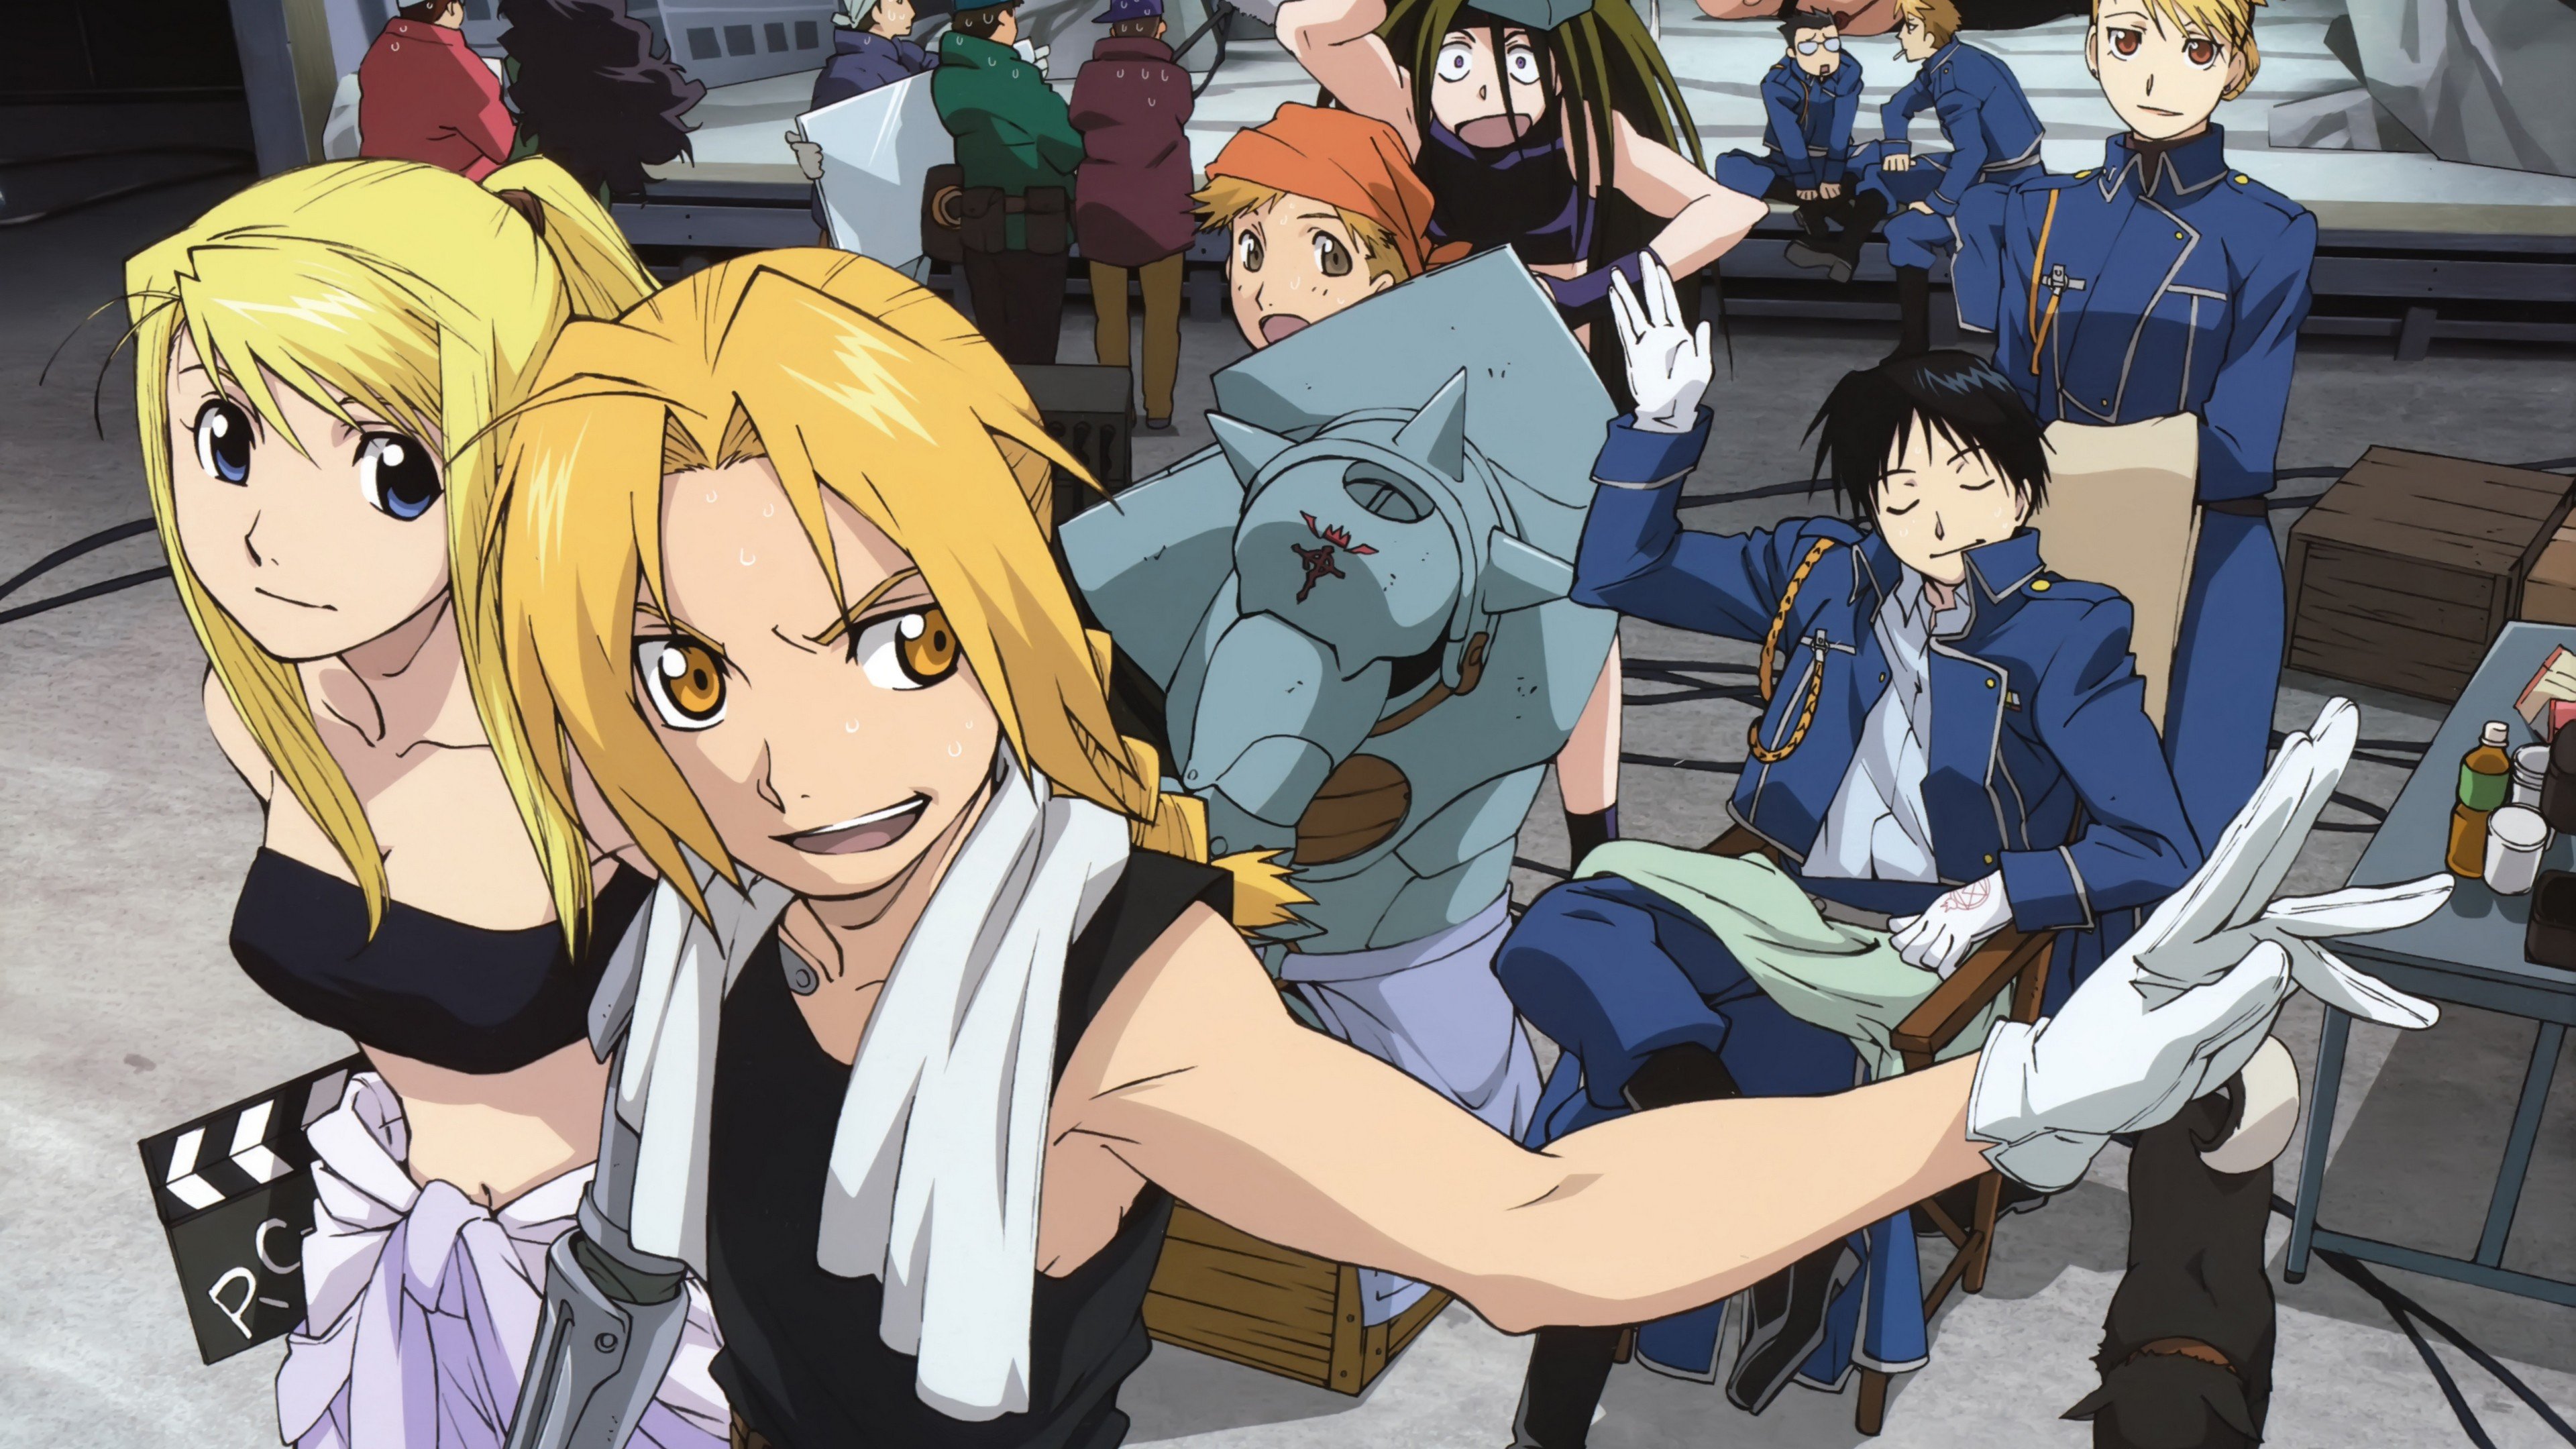 Download hd wallpapers of 124033-anime, Full_Metal_Alchemist, Elric_Edward,...